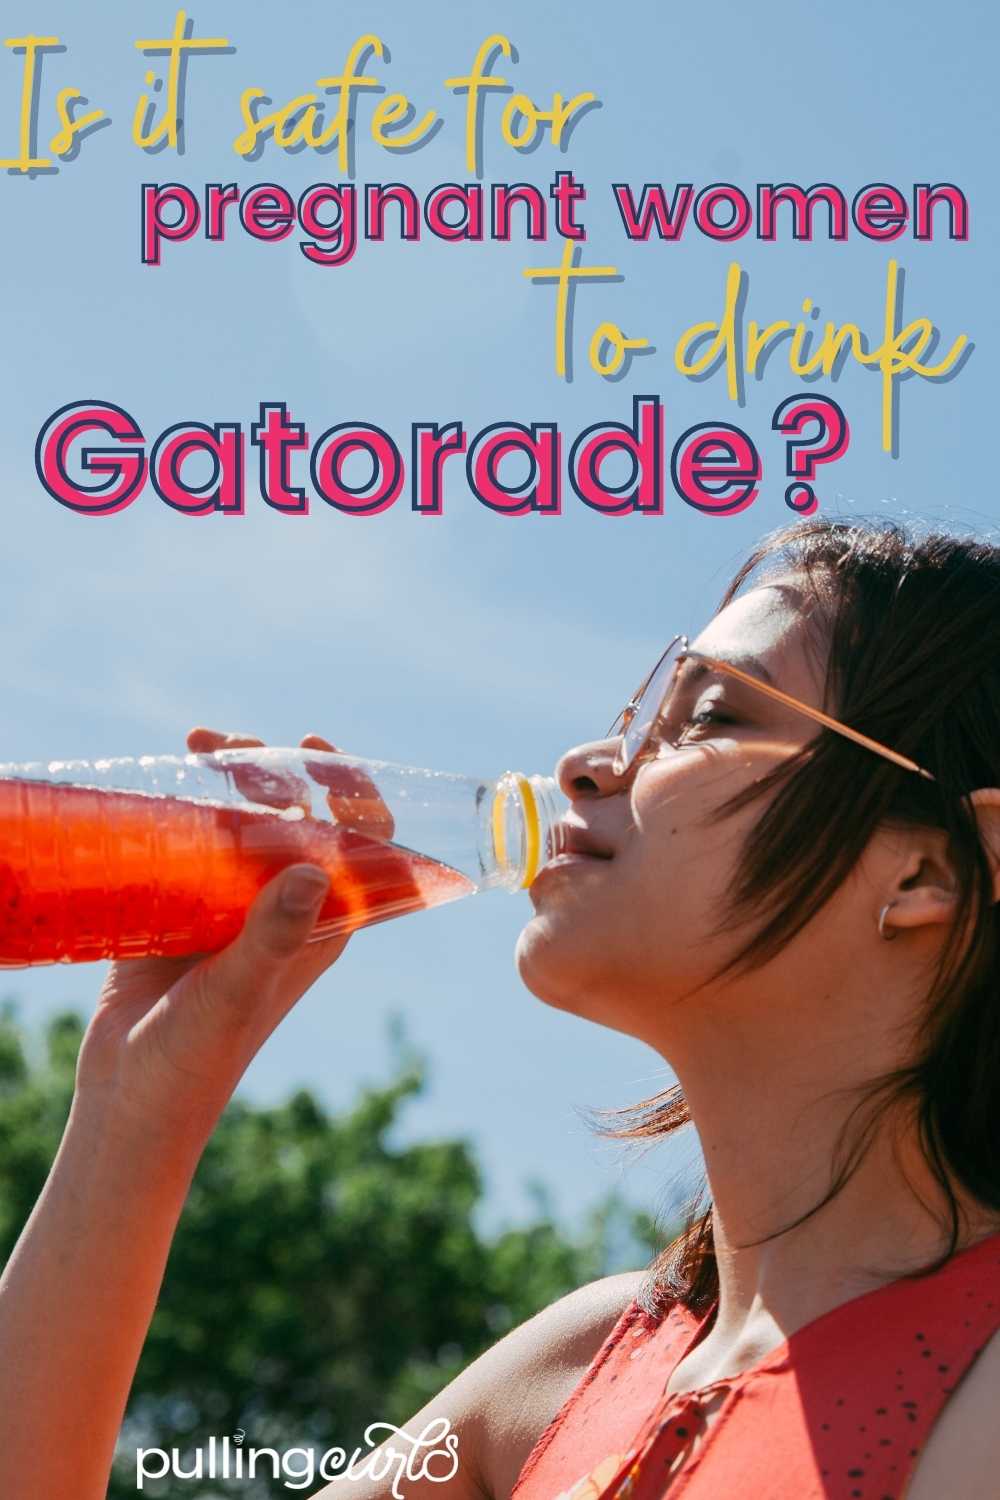 Drinking Gatorade during pregnancy is something a lot of women consider in their attempt to stay hydrated and with good electrolyte levels. Why could Gatorade be beneficial or possibly detrimental to their pregnancy? via @pullingcurls